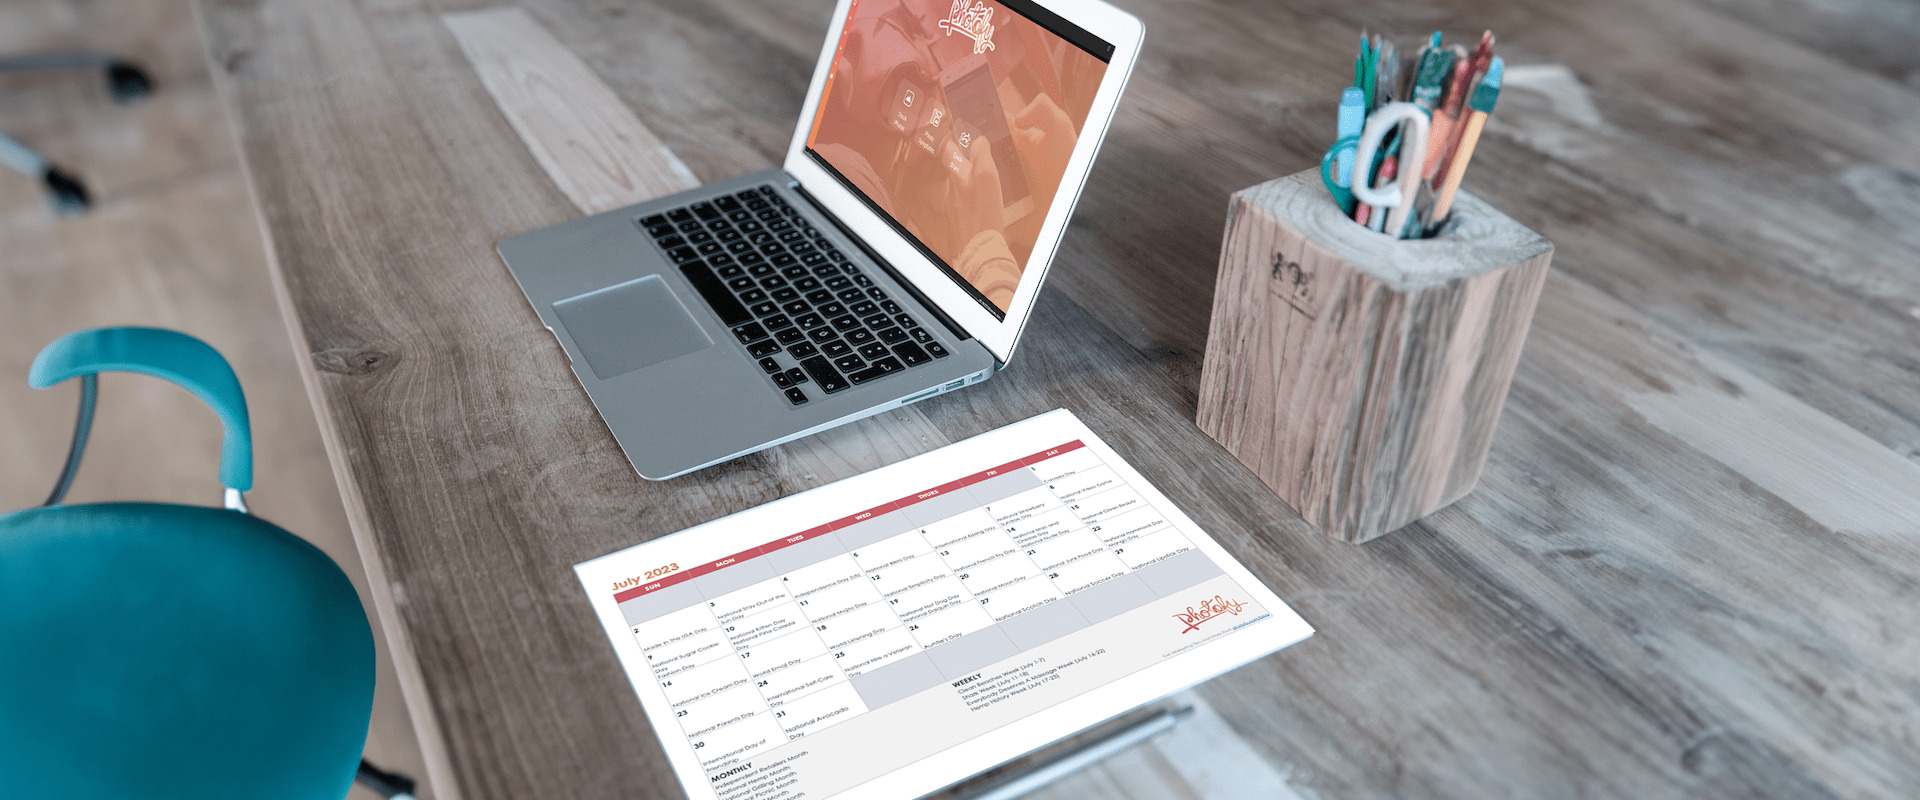 Plan your June social media content for your direct sales business with this June social media holidays calendar.